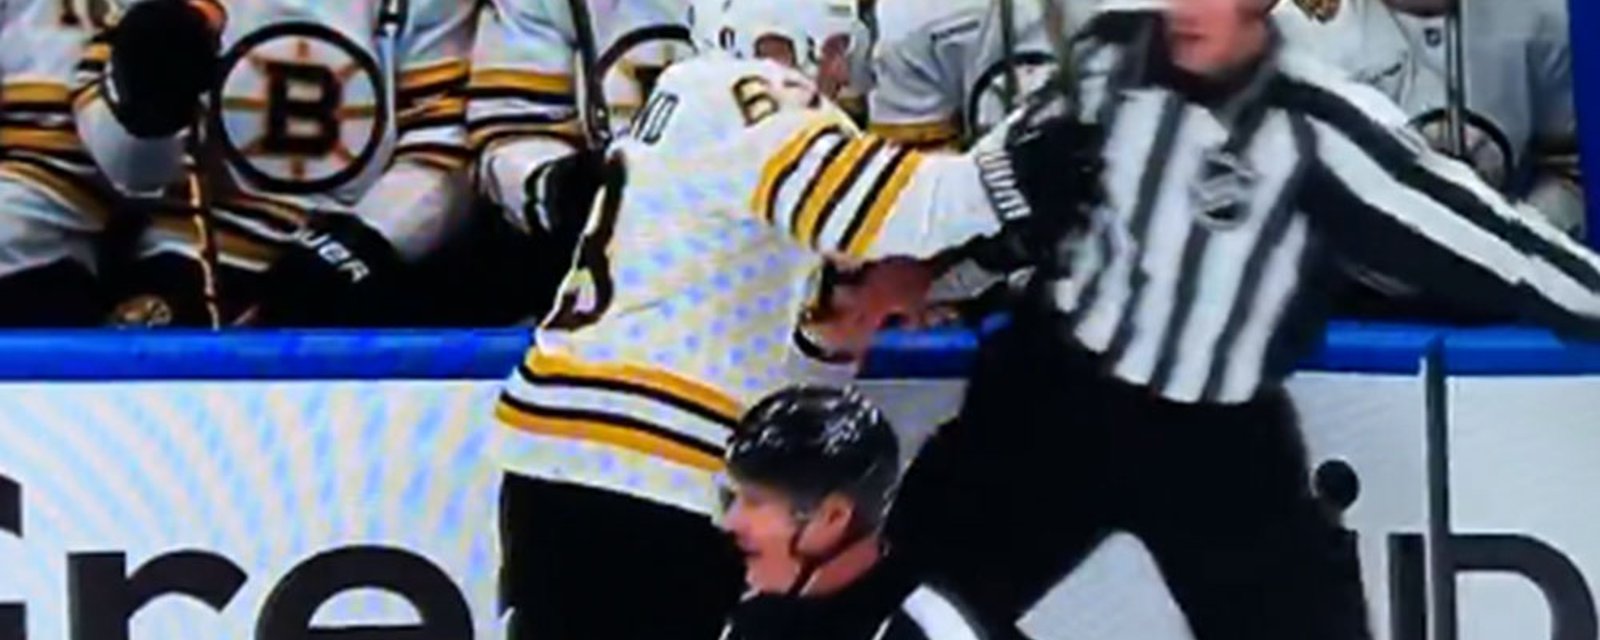 Brad Marchand shoves a referee and gets away with it!